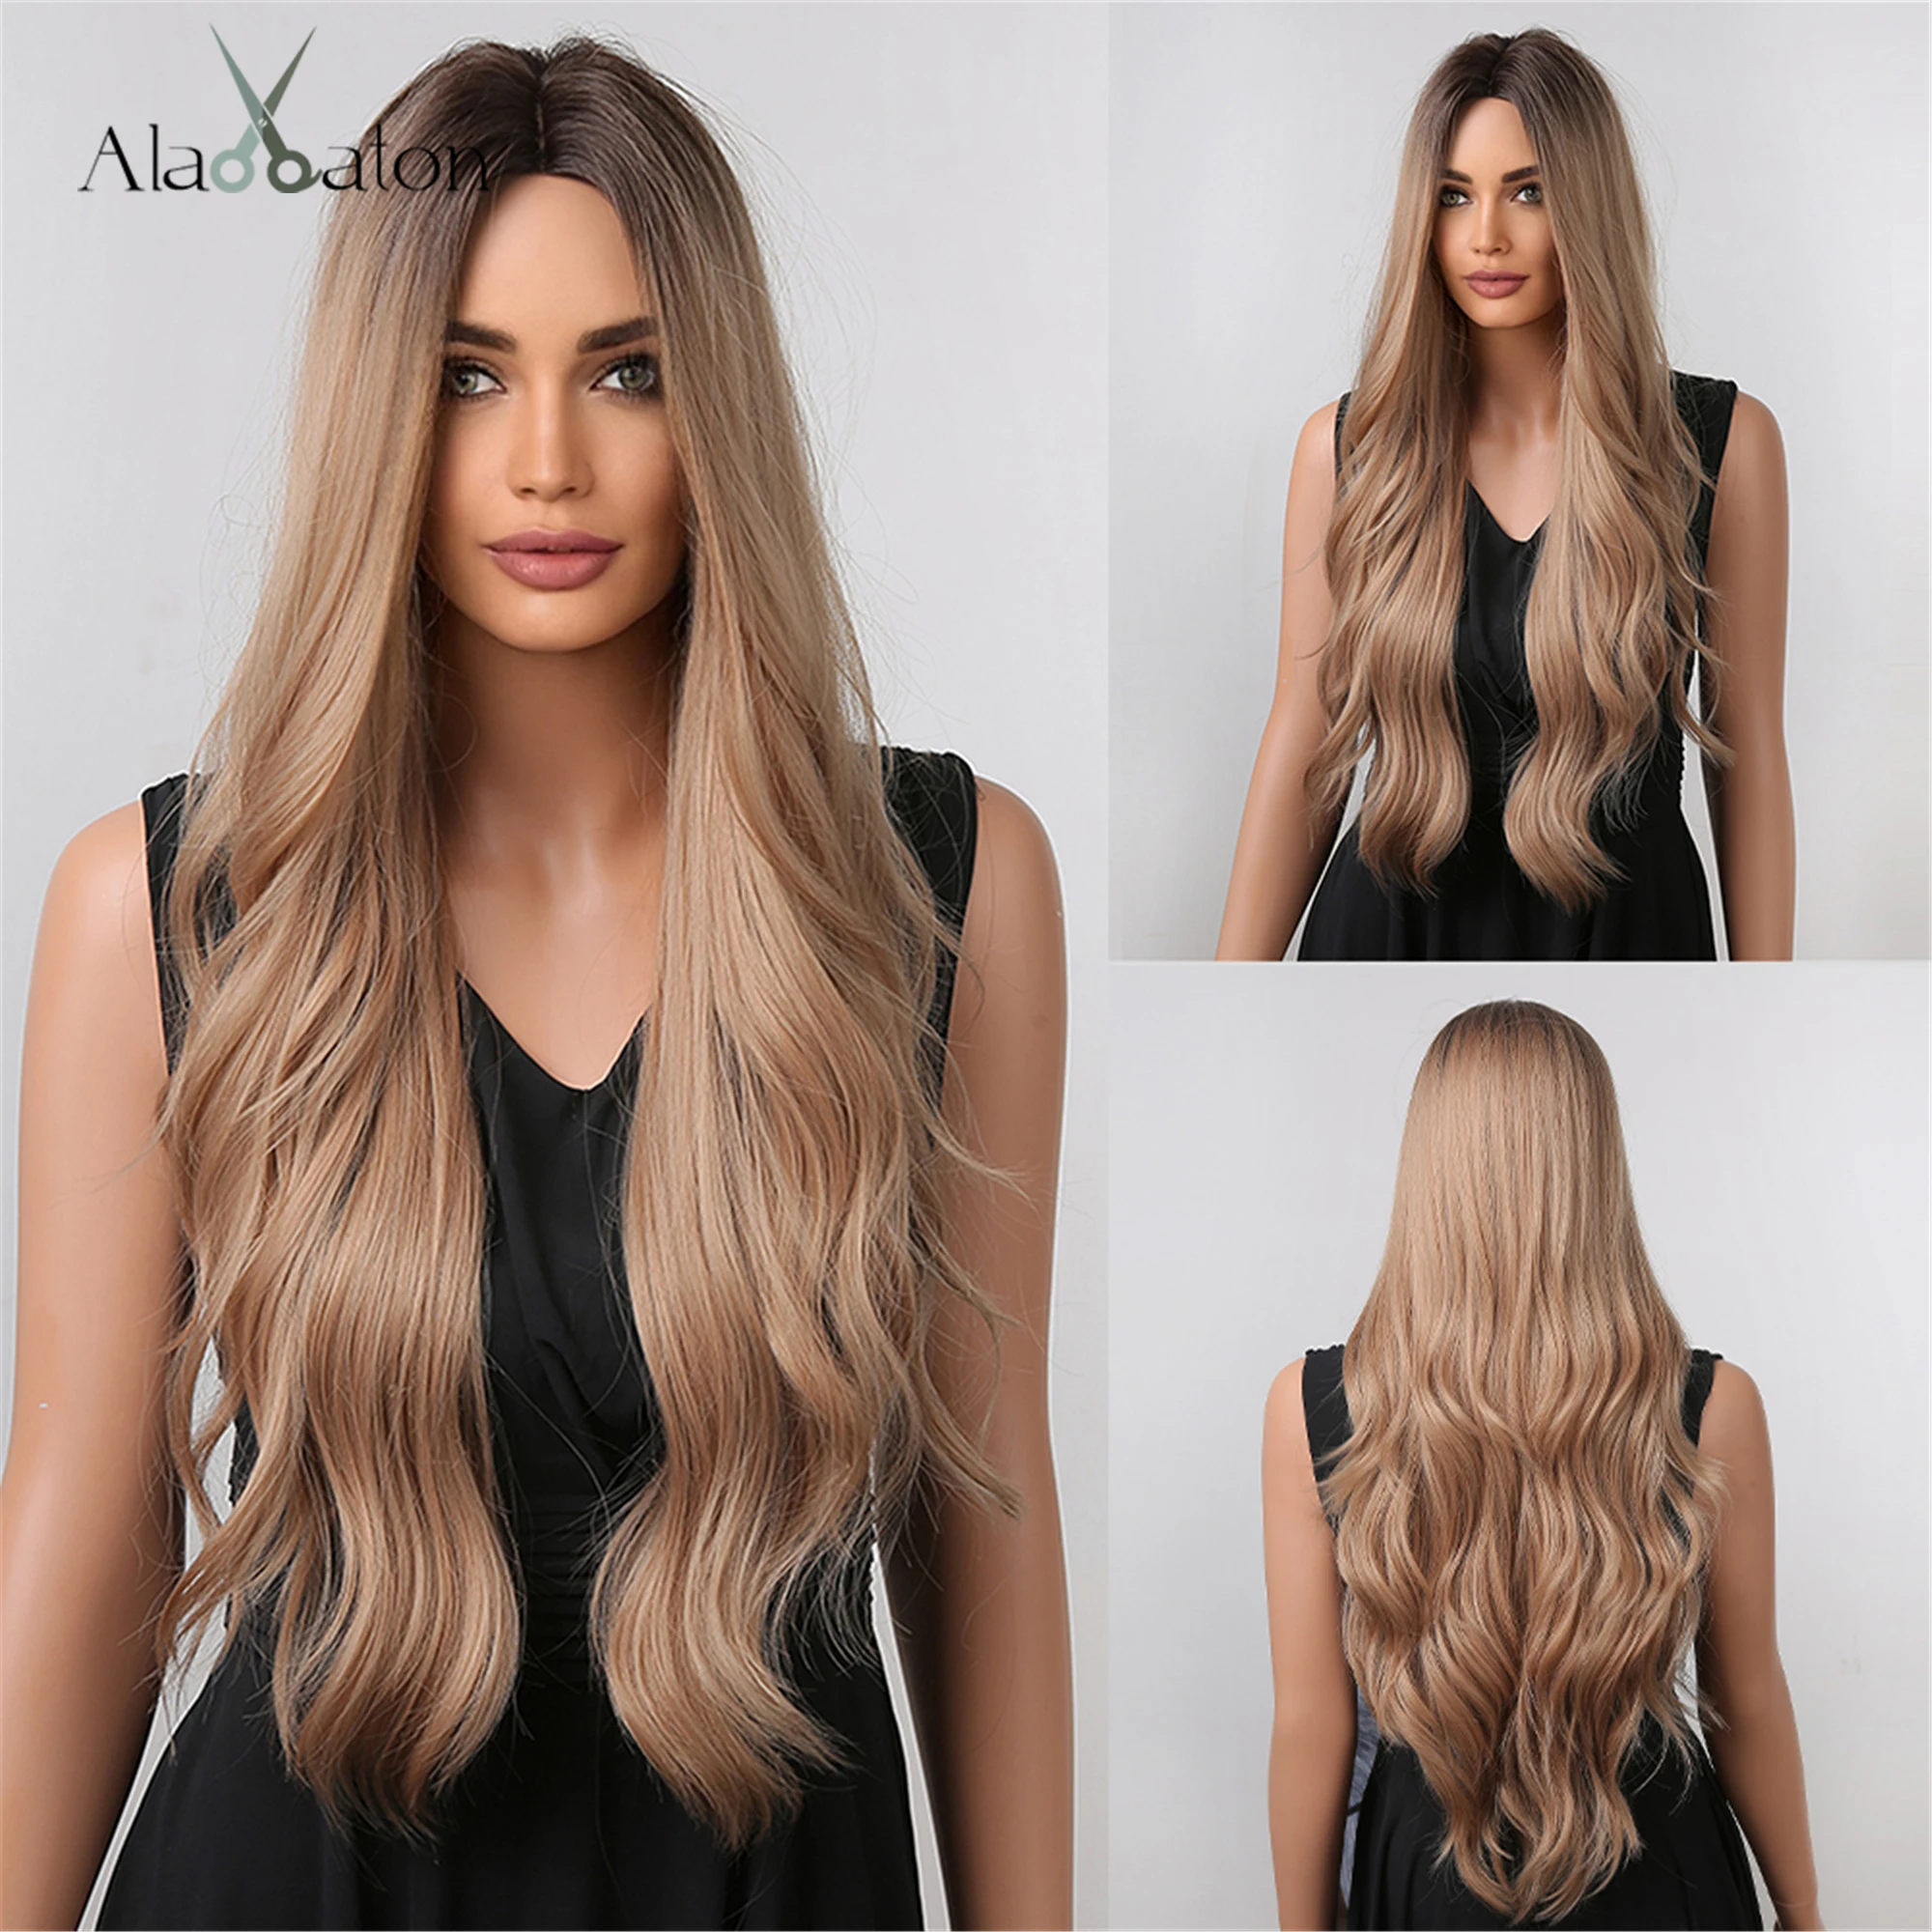 

ALAN EATON Dirty Blonde with Dark Root Brown Ombre Wavy Wig Synthetic Hair Wigs for Women Afro Long Wavy Cosplay Heat Resistant